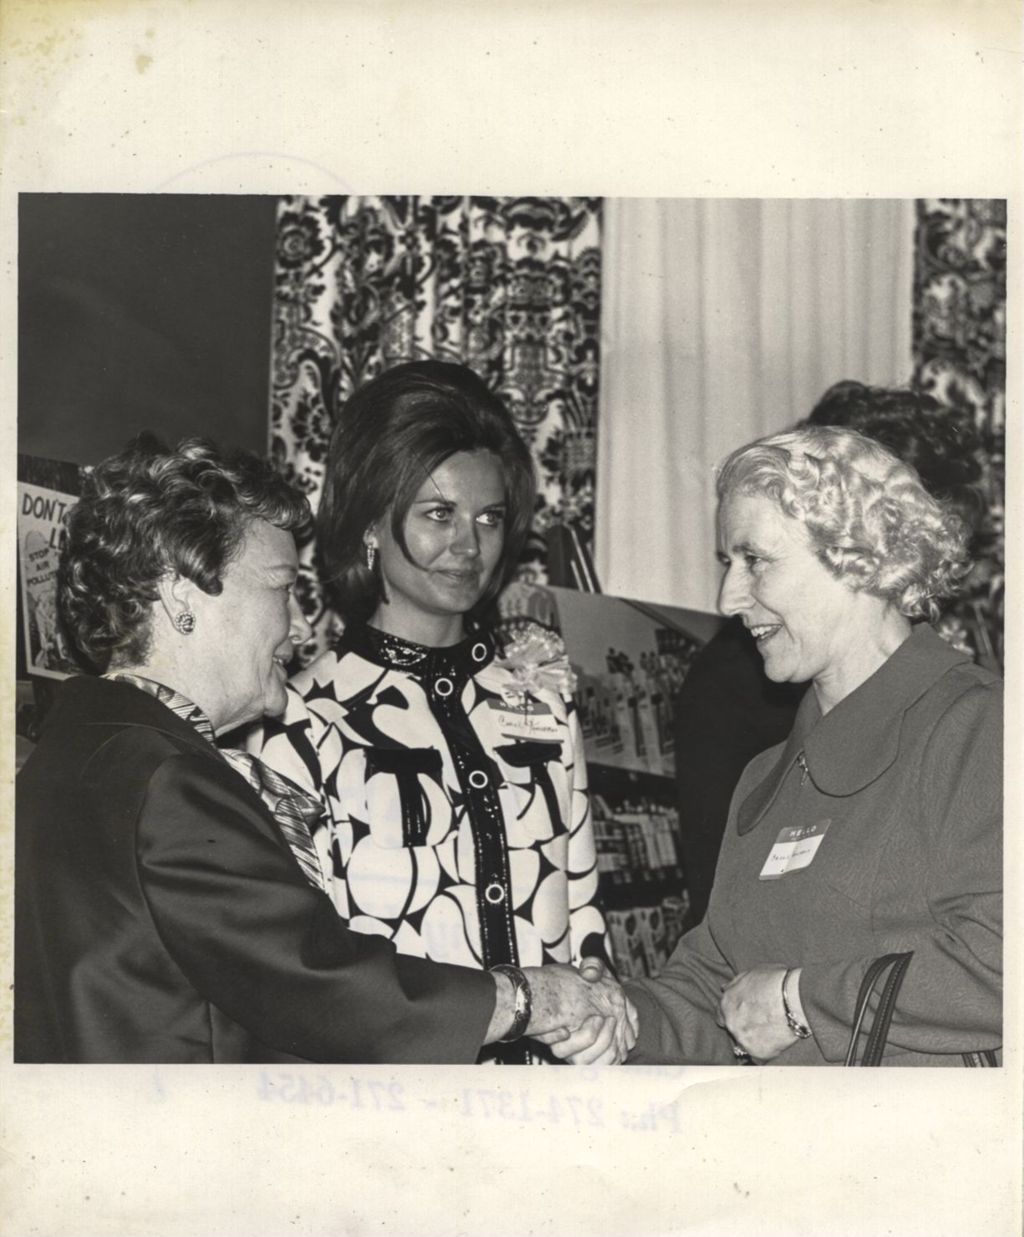 Miniature of Eleanor Daley in a receiving line chatting with a woman at a "We Care" event